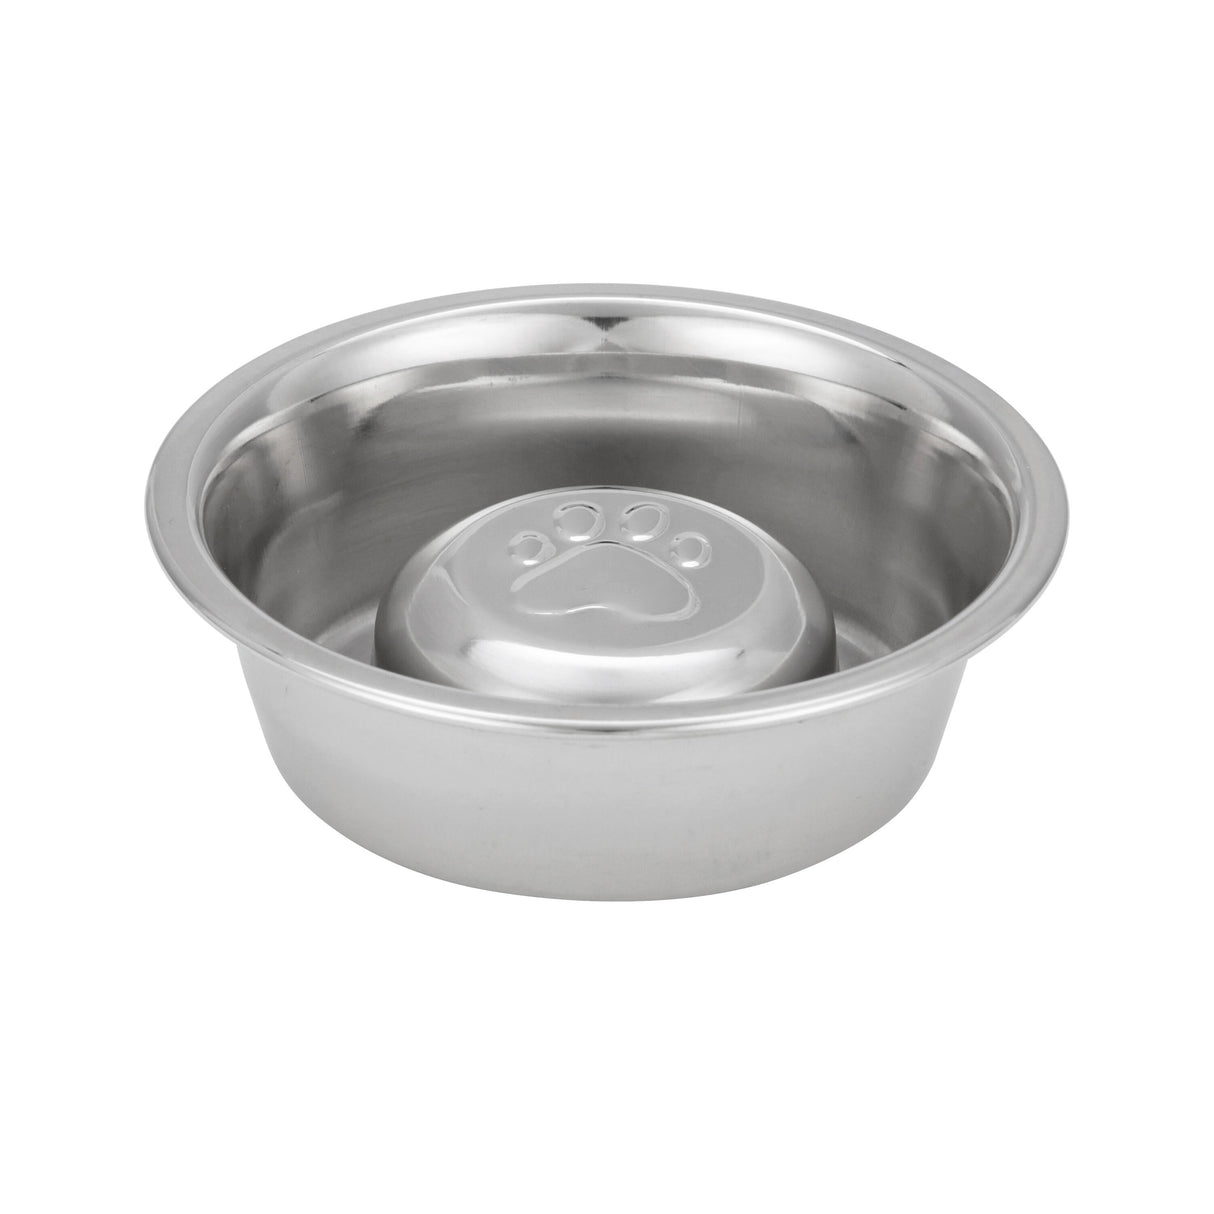 Neater Pet Brands Stainless Steel Slow Feed Bowl for Dogs or Cats - Fits in Neater Feeders and Other Raised Feeders (3/4 Cup)